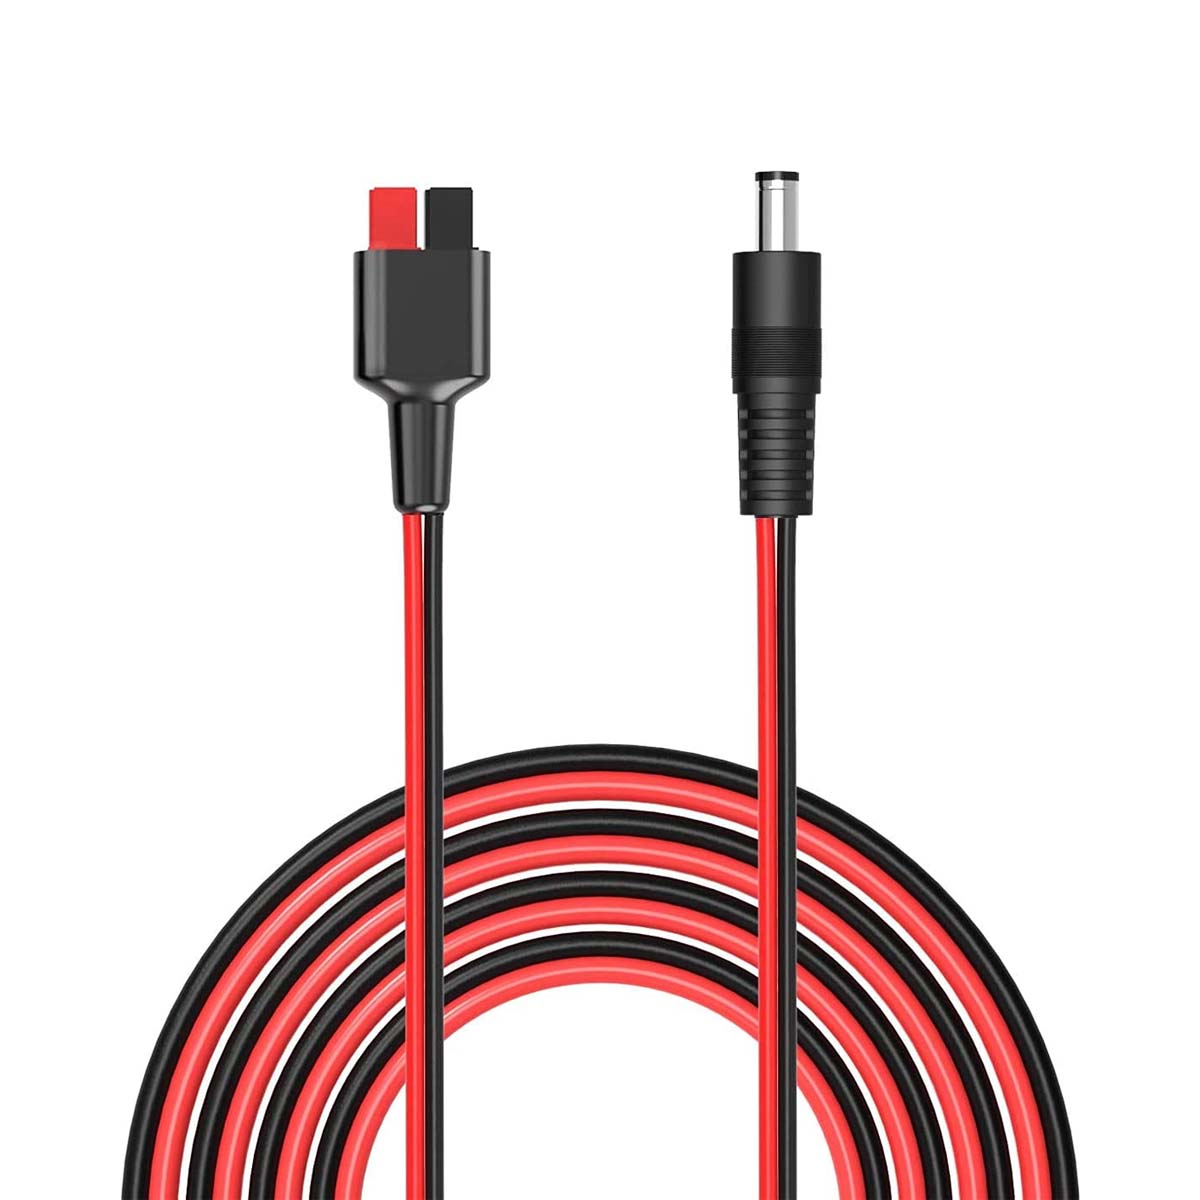 ALLPOWERS DC5525 (5.5mm x 2.5mm) to Anderson connector adapter cable